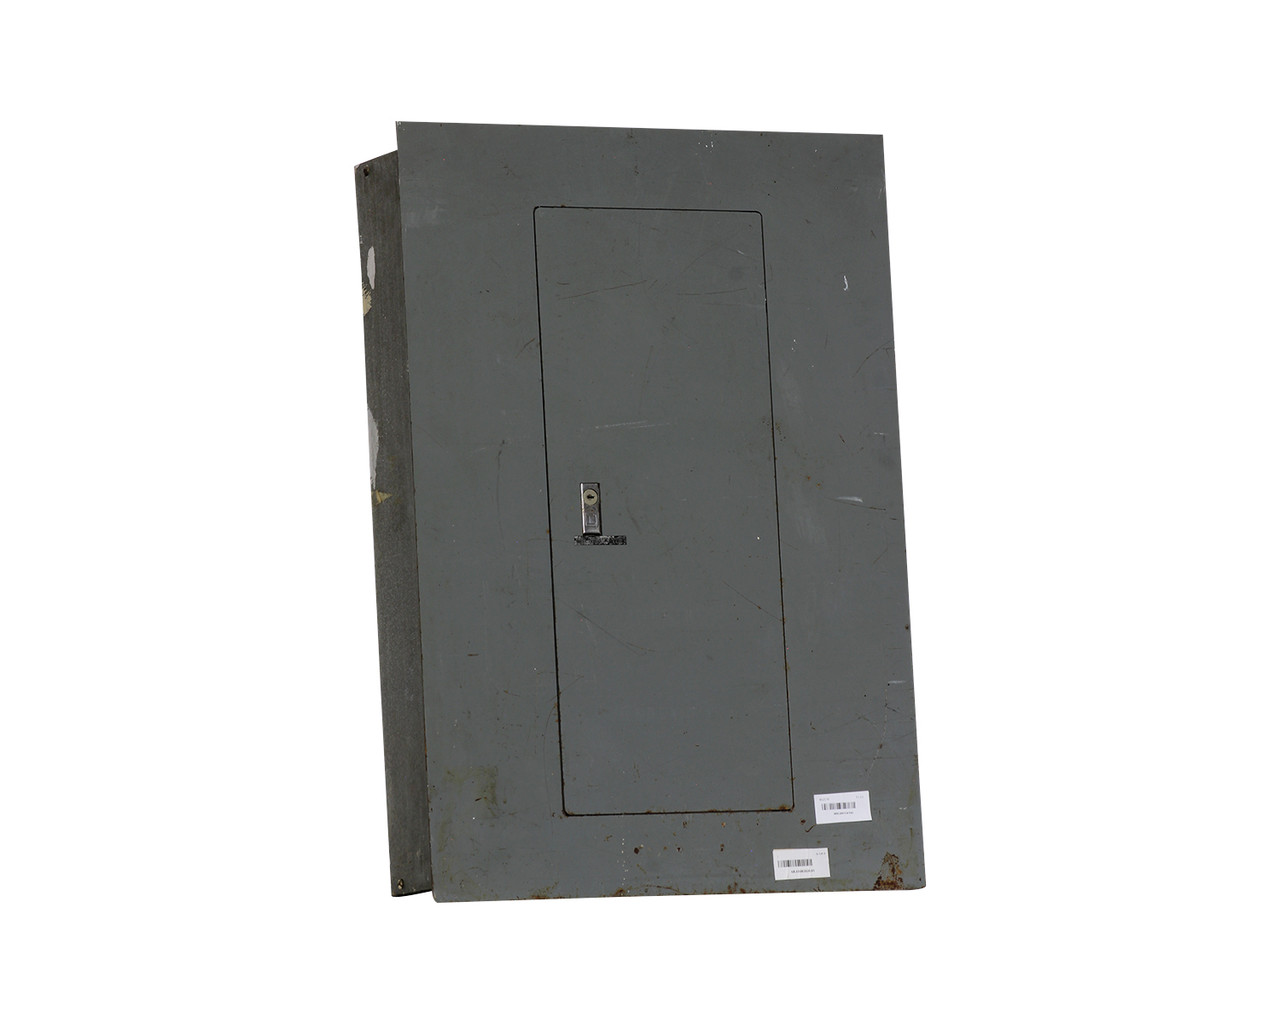 Square D NQOD 12-3414149 Main Breaker Panelboard 60A 208Y/120V NEMA: 1 D: 6 H: 31 W: 22 Number of Spaces: 30 3 PH, 4 Wires, Cover MHC29F, Enclosure MH29